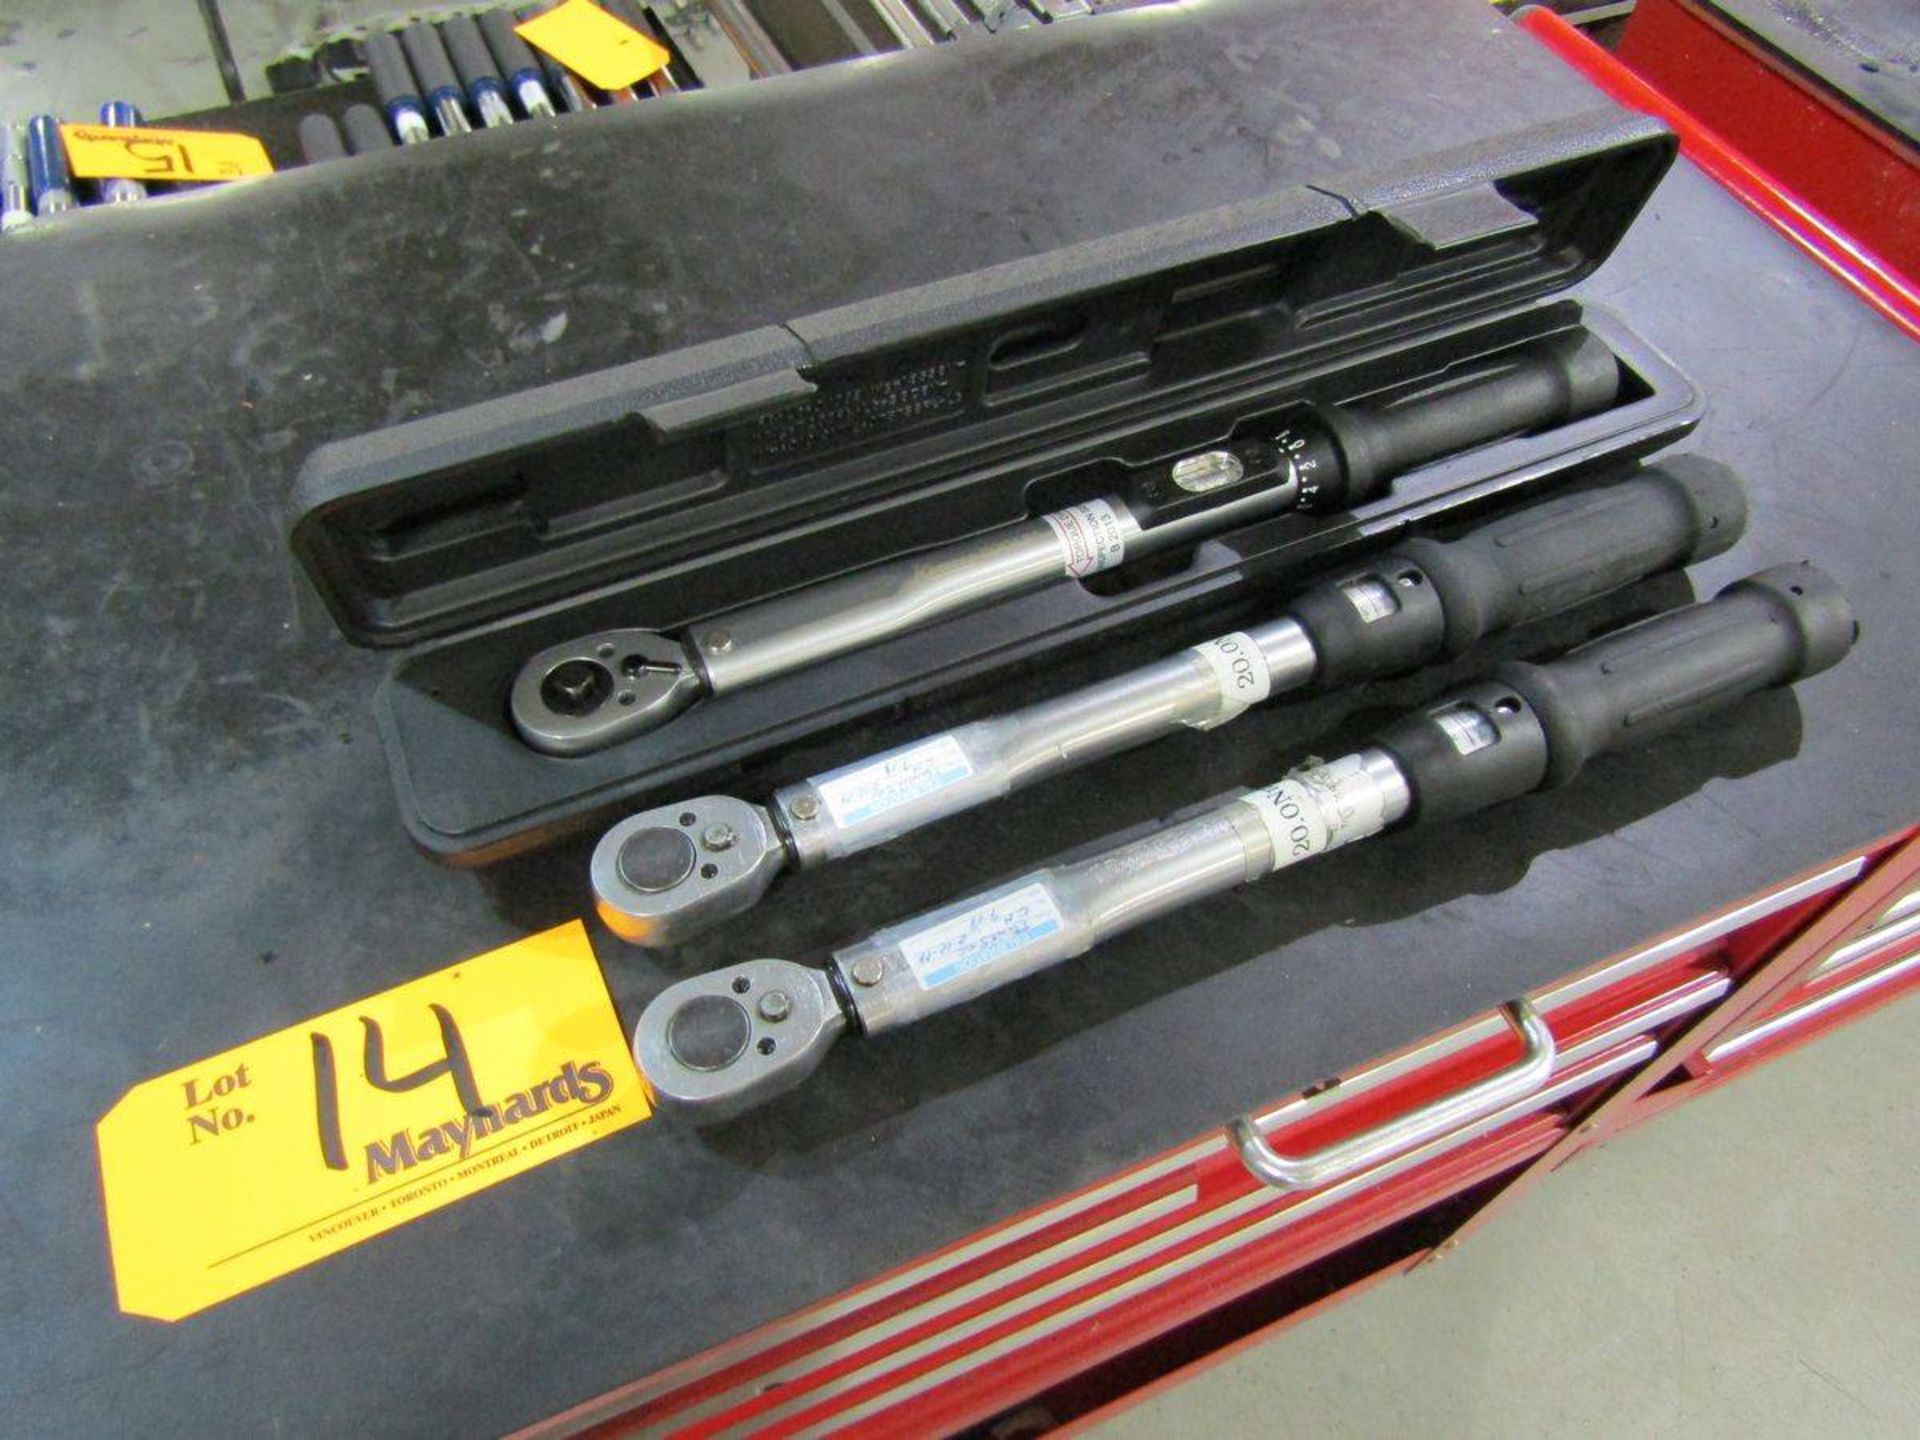 Kamasa Tools K2740 3/8" Driver Clicker-Type Torque Wrench